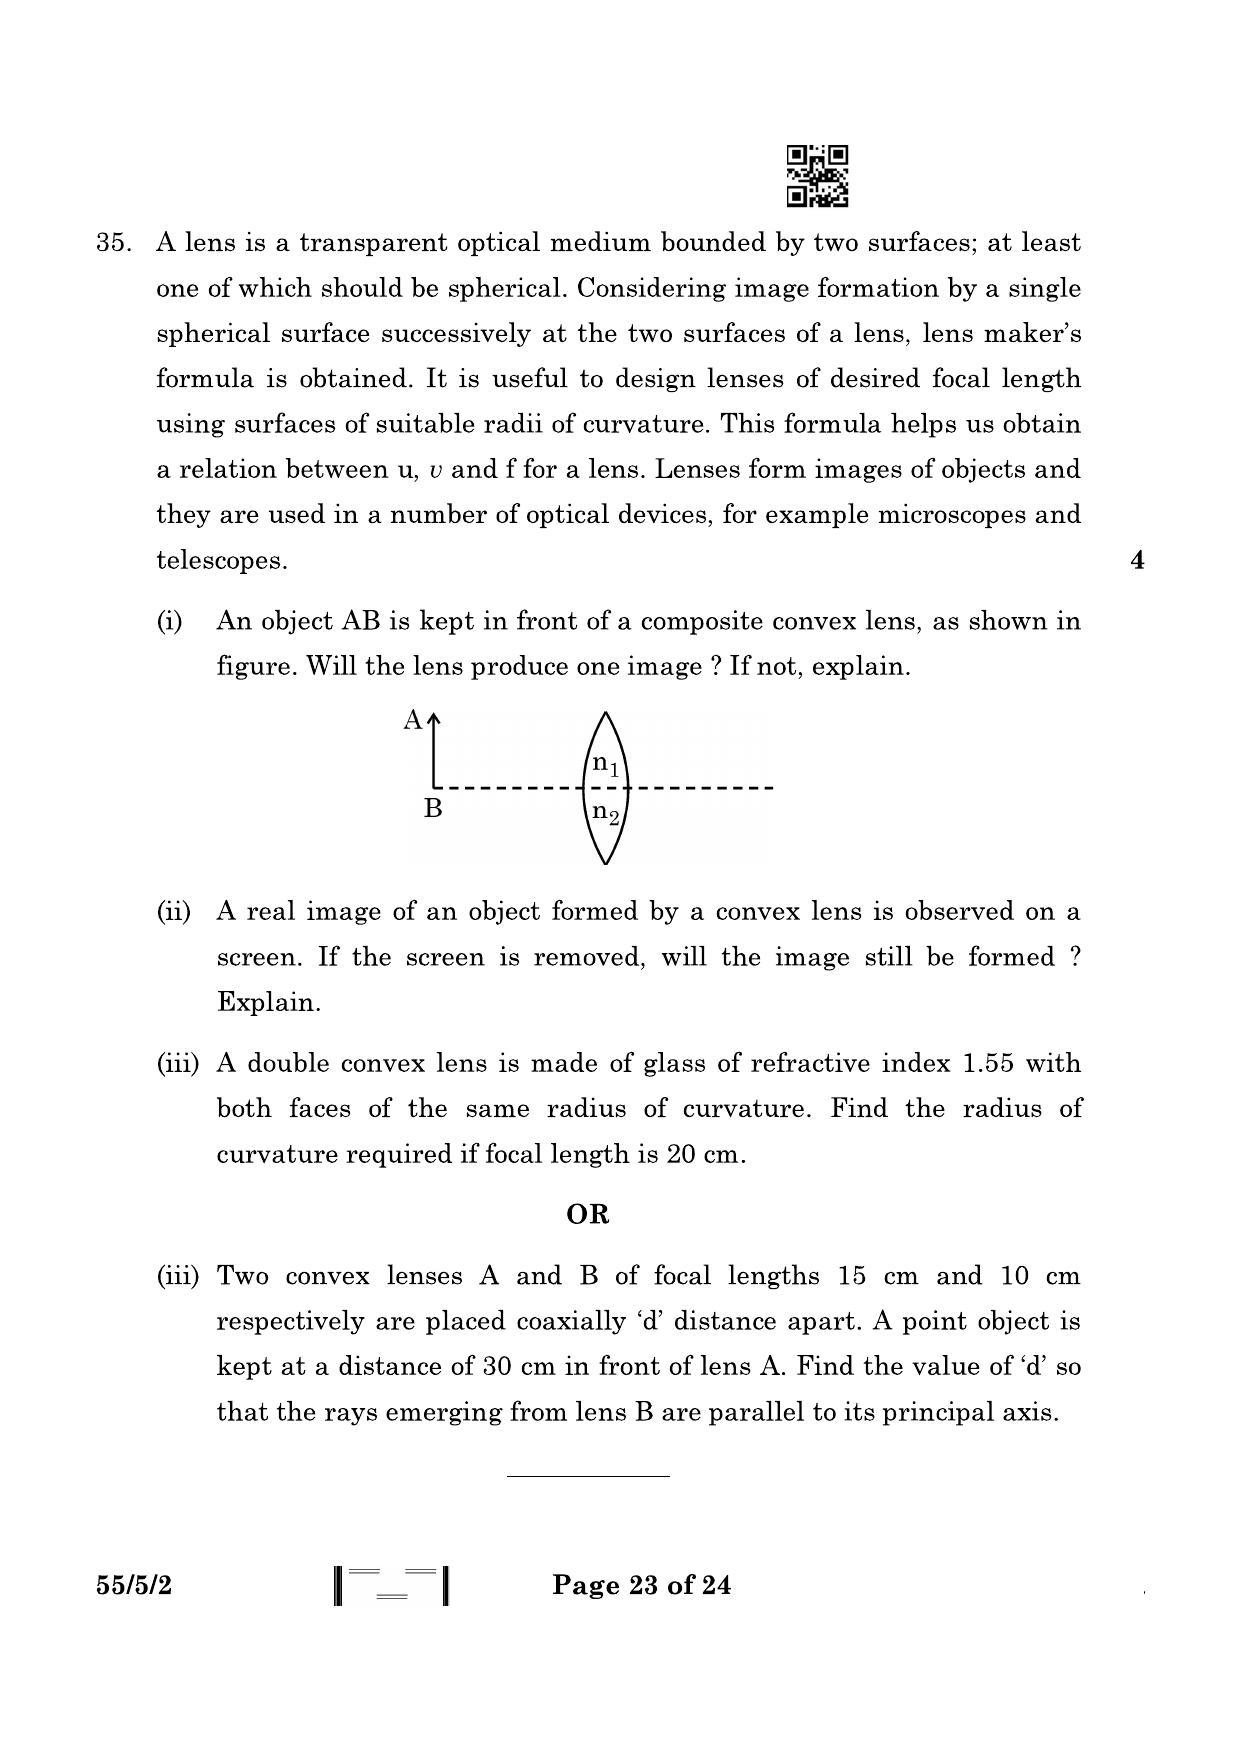 CBSE Class 12 55-5-2 Physics 2023 Question Paper - Page 23